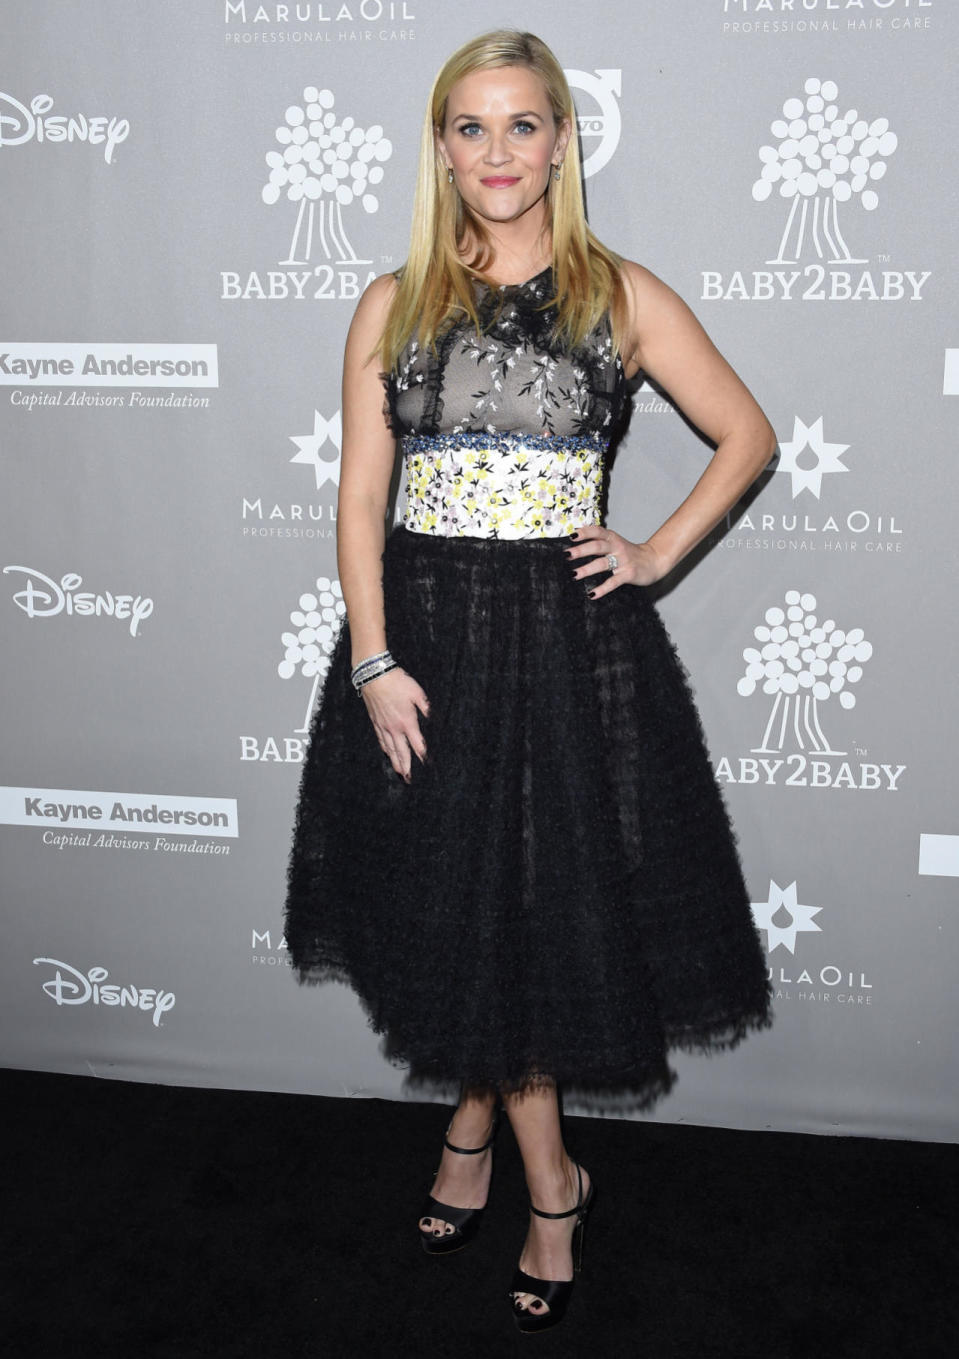 Reese Witherspoon wears a black and floral tulle cocktail dress at the 2015 Baby2Baby Gala at 3LABS on Nov. 14, 2015 in Culver City, California.